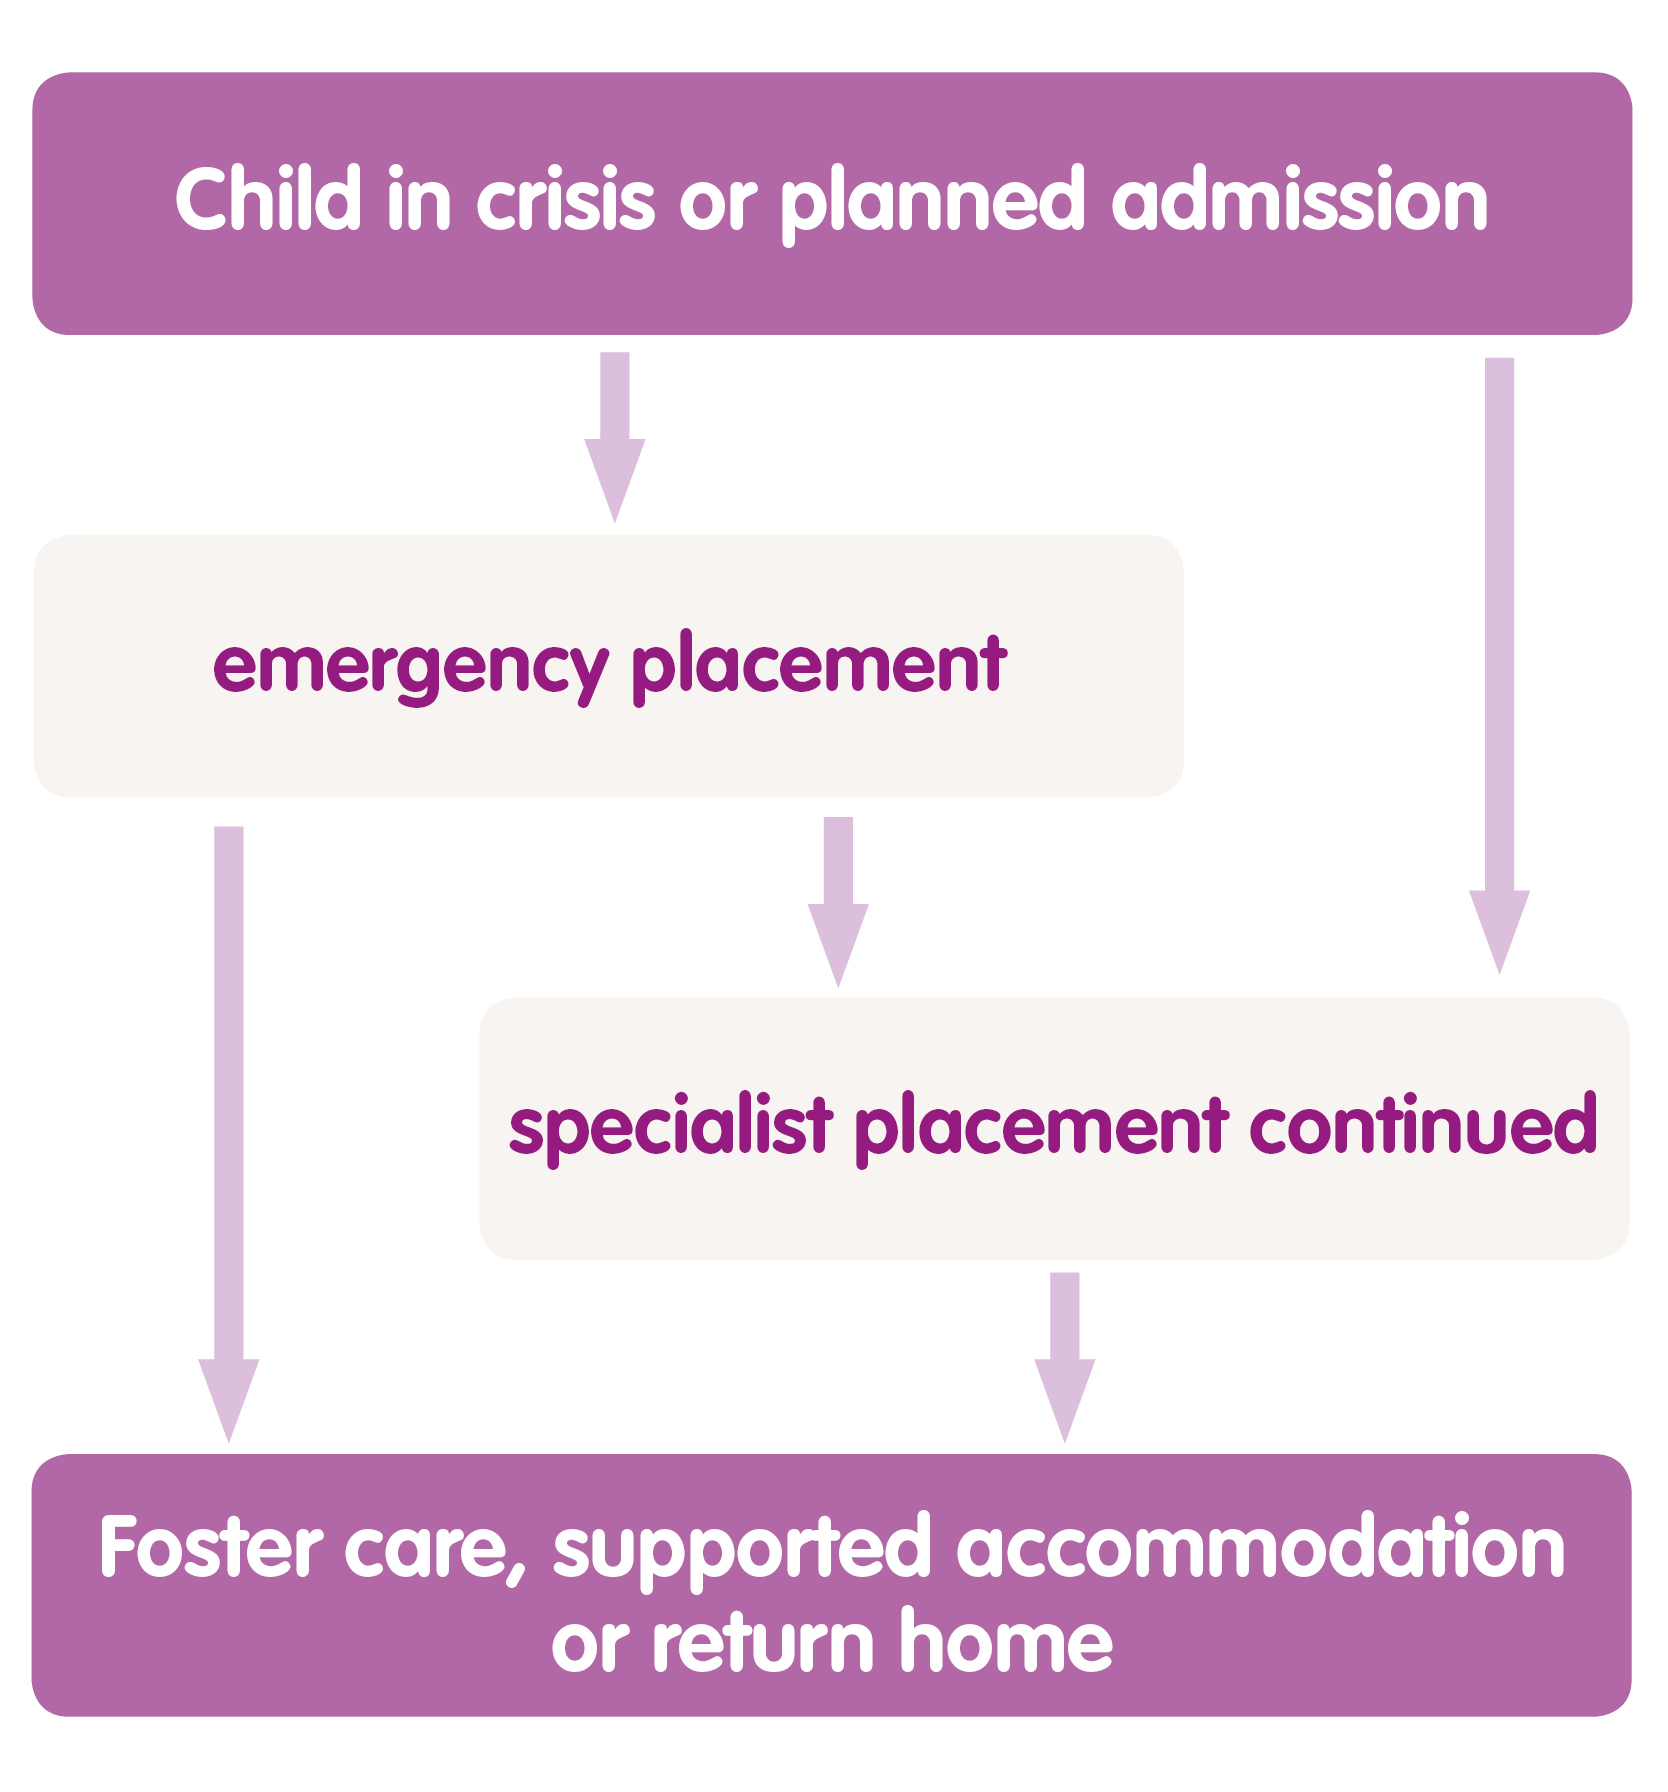 Care Pathway